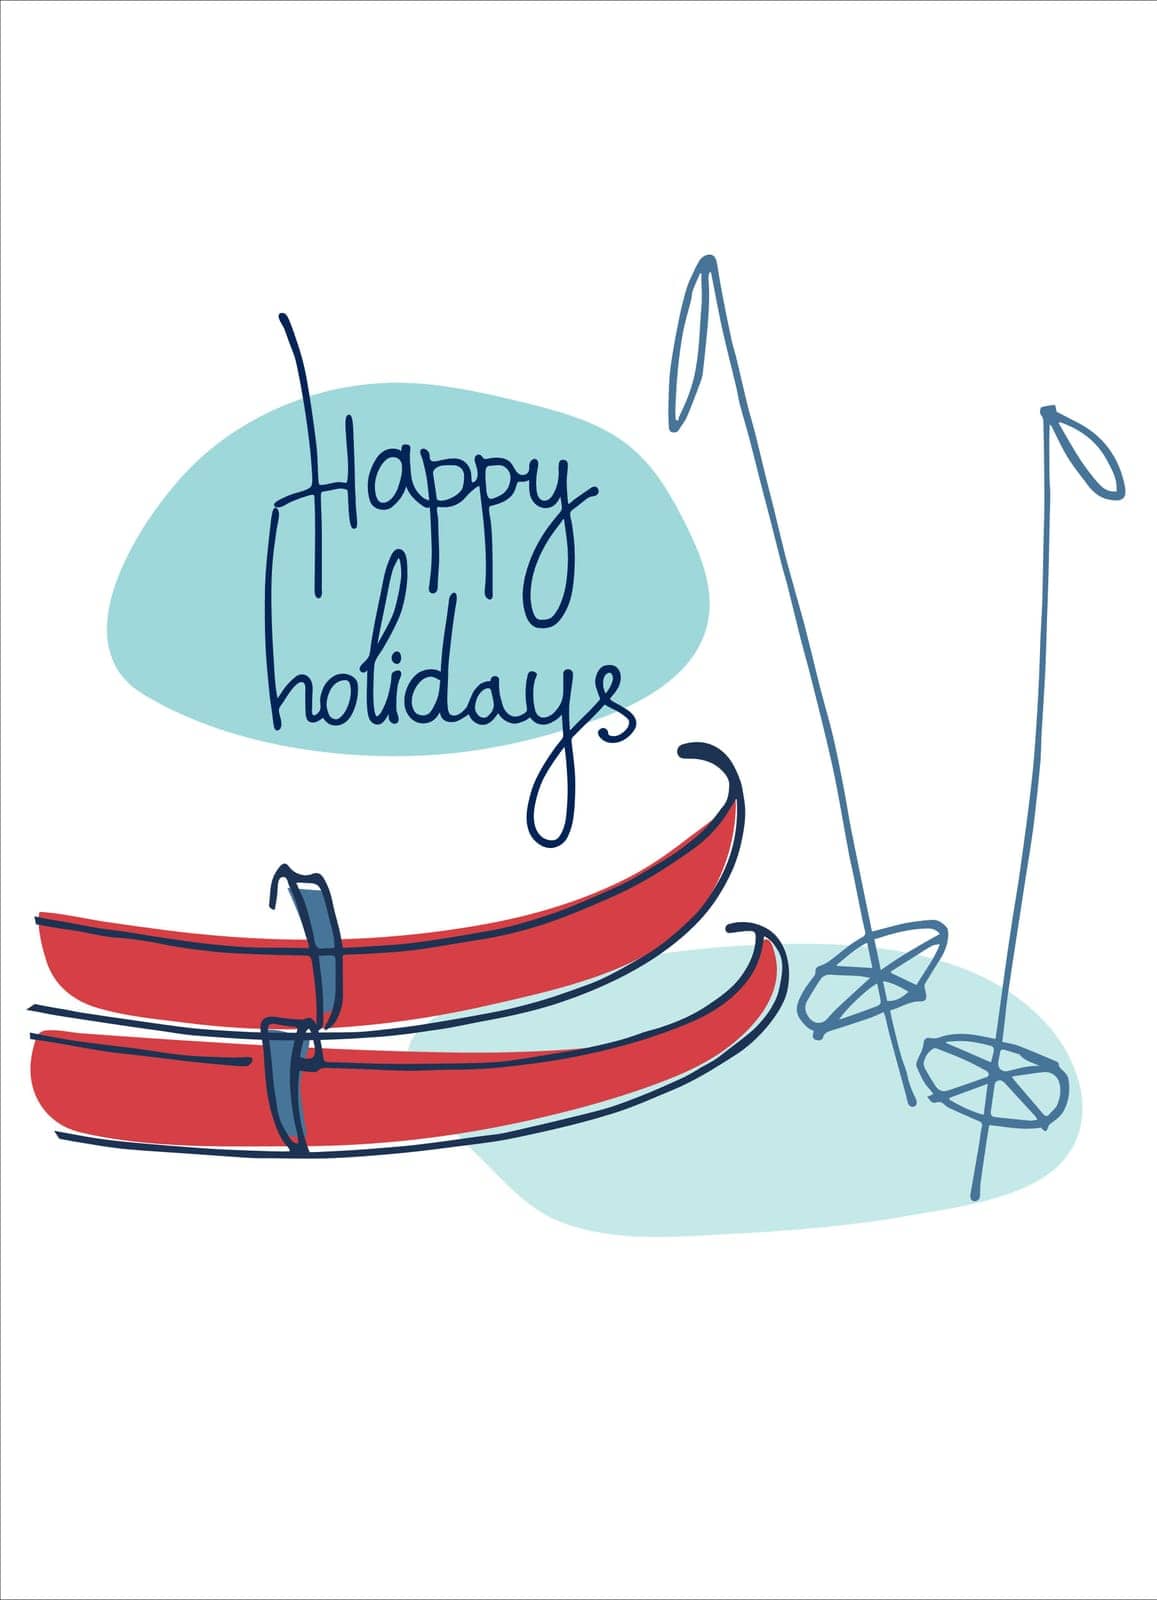 Happy holidays greeting lettering, vintage skis on the snow. Winter holidays concept. Winter outdoor activity concept. Ski resort banner, ad. Sporting goods store greeting card. Greeting card template